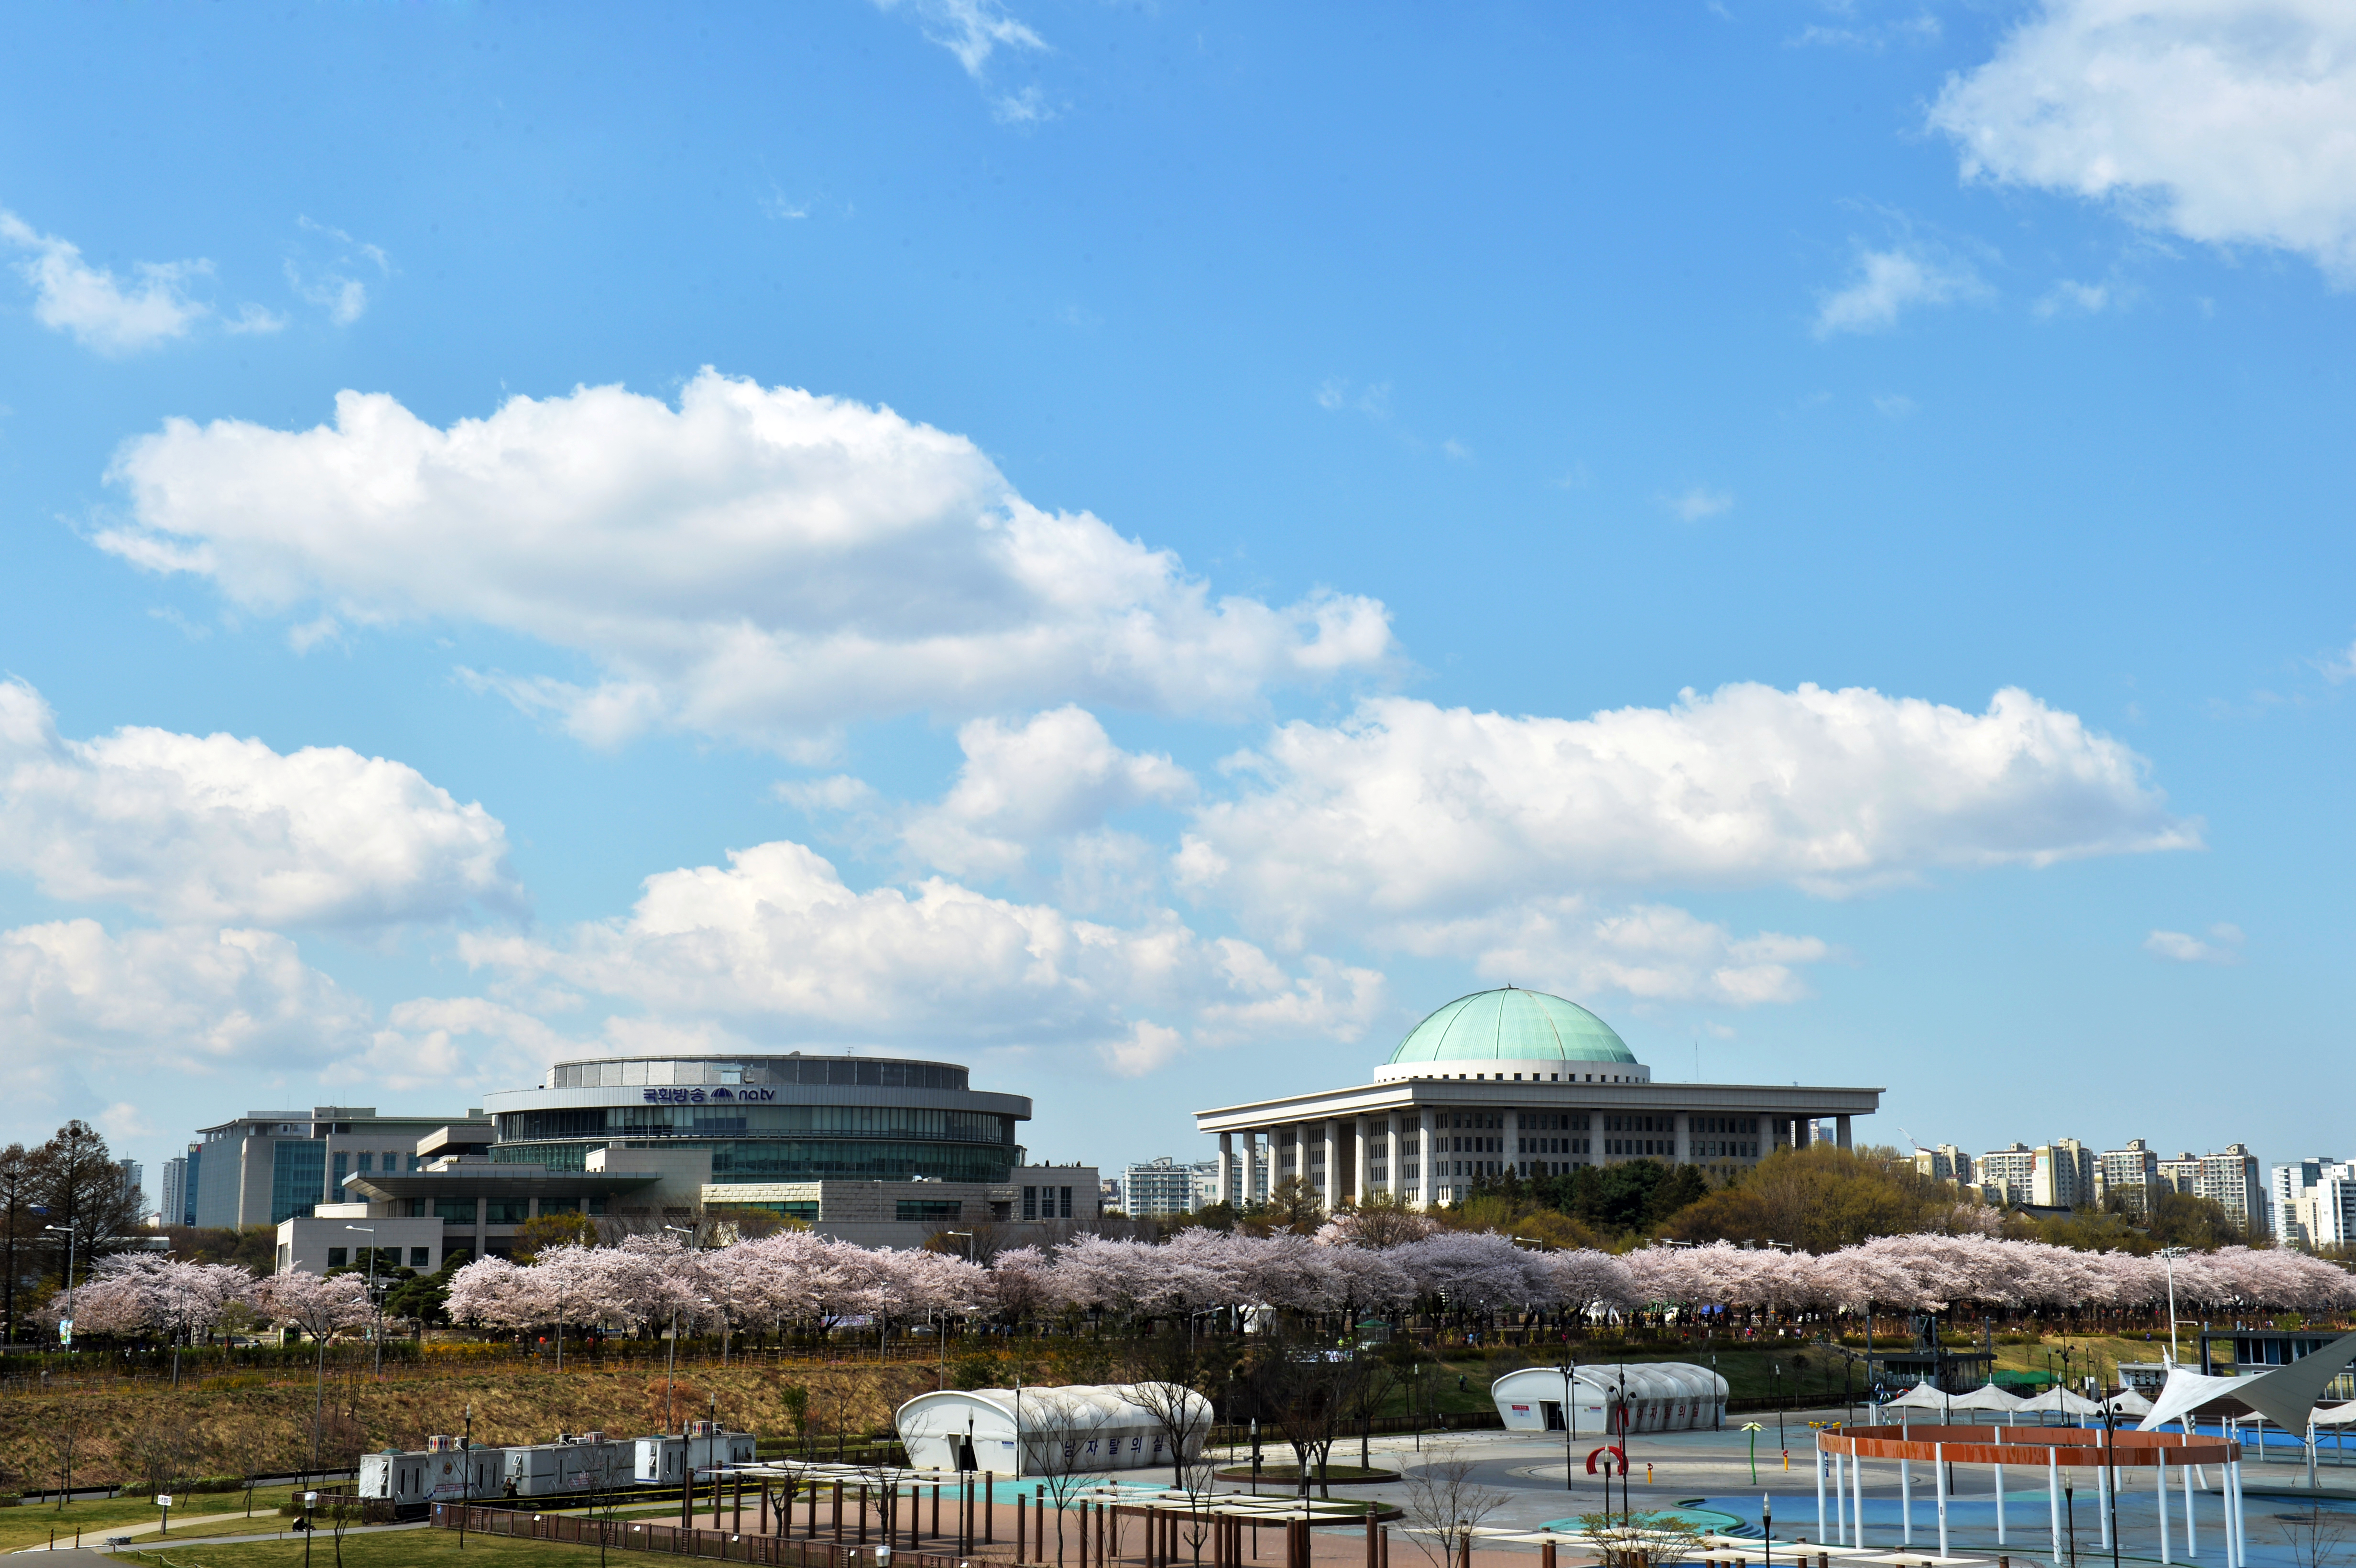 View of the National Assembly Building 관련사진 1 보기